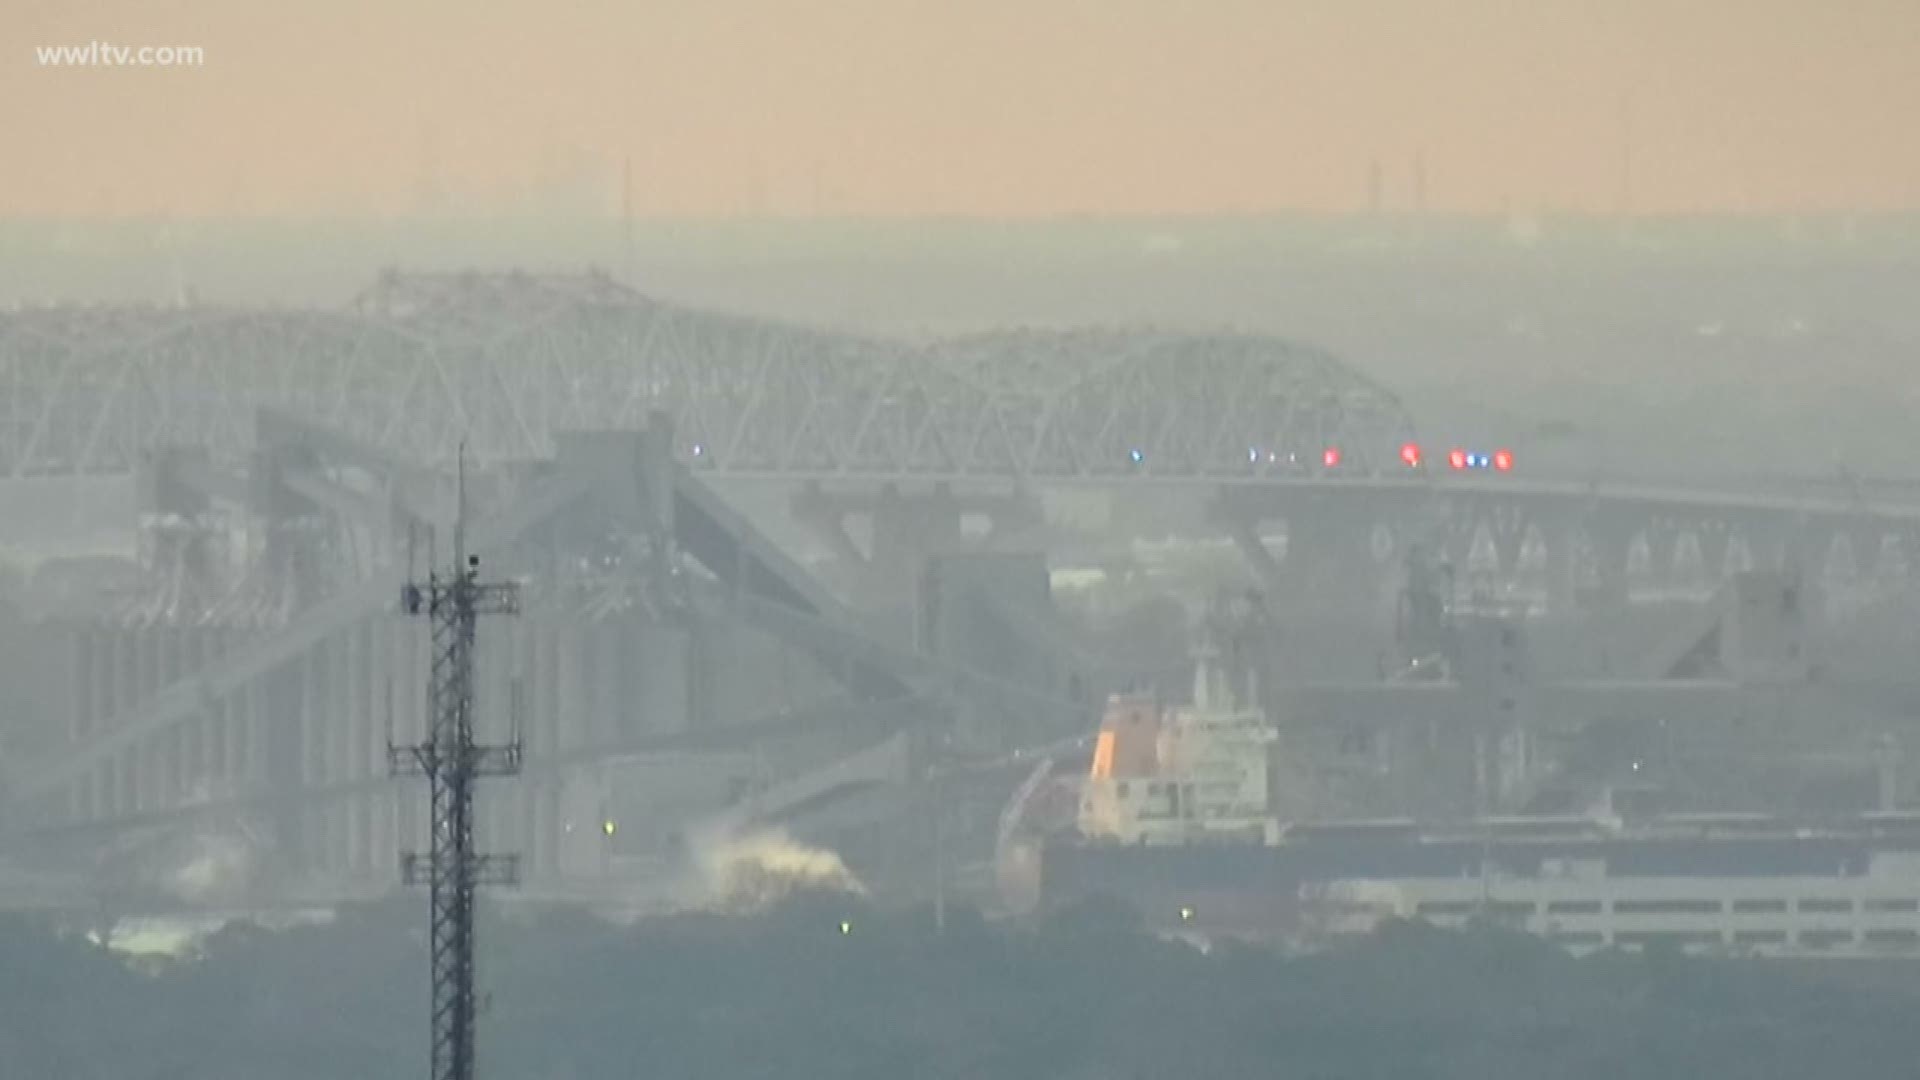 Officials said the bridge was closed in both directions due to 'an incident'